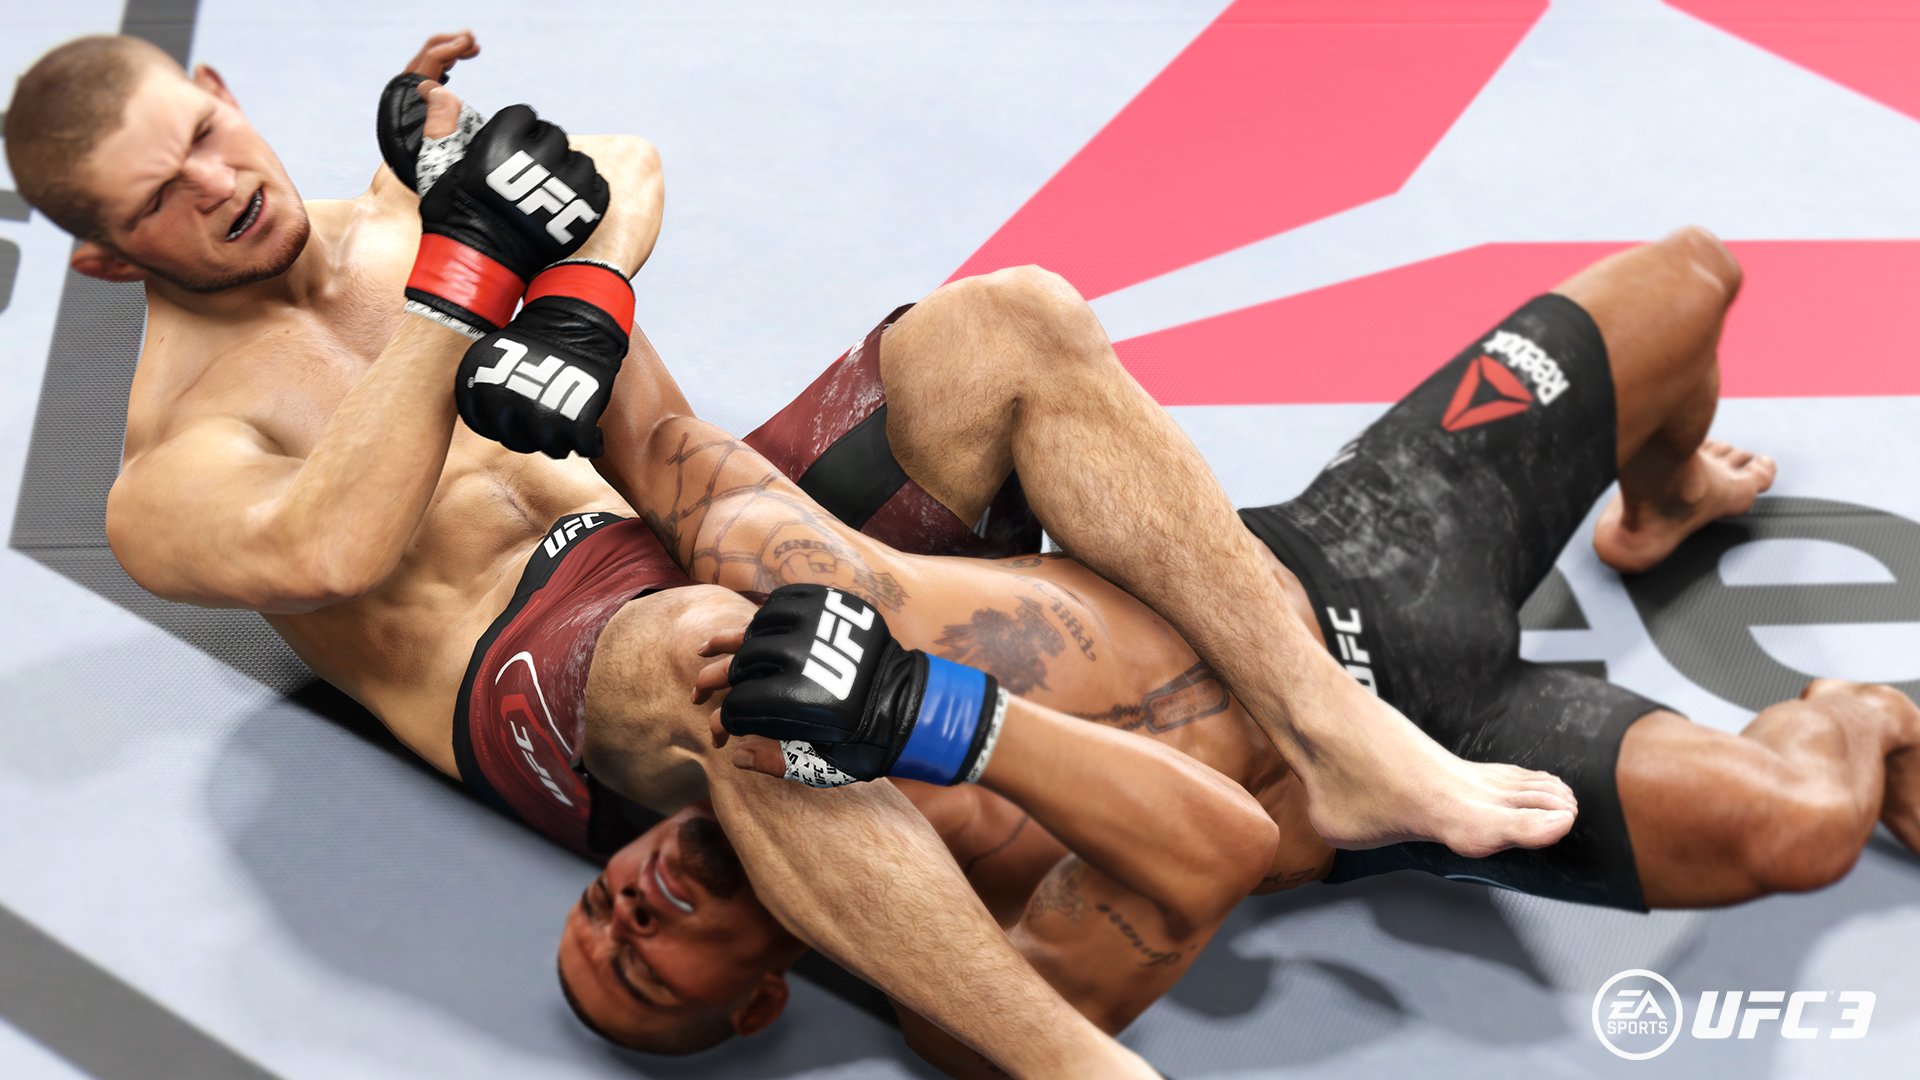 EA SPORTS UFC on Twitter: "Rule the mat in #EAUFC3 with these ground grappling controls. https://t.co/vfc2JO0MHN / Twitter